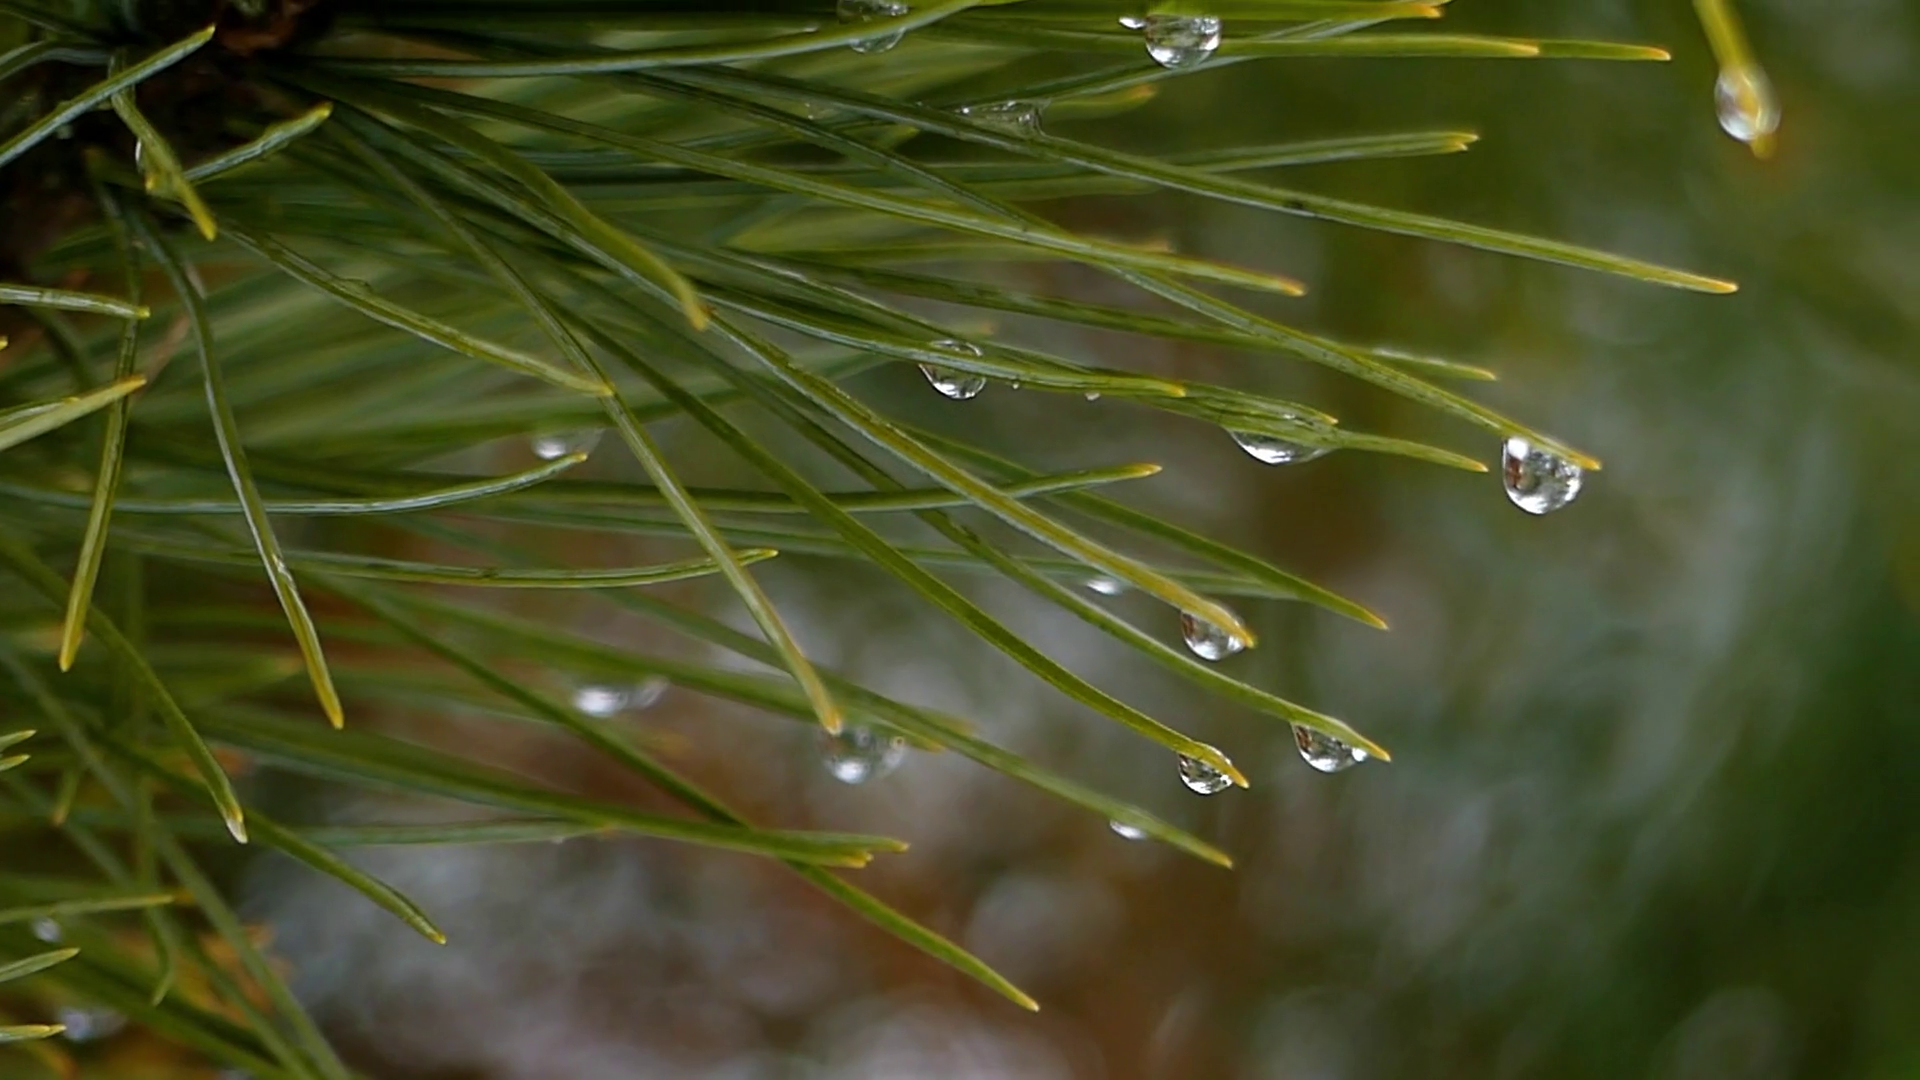 Branches of Spreading Pine Trees Covered With Dew Drops Which ...